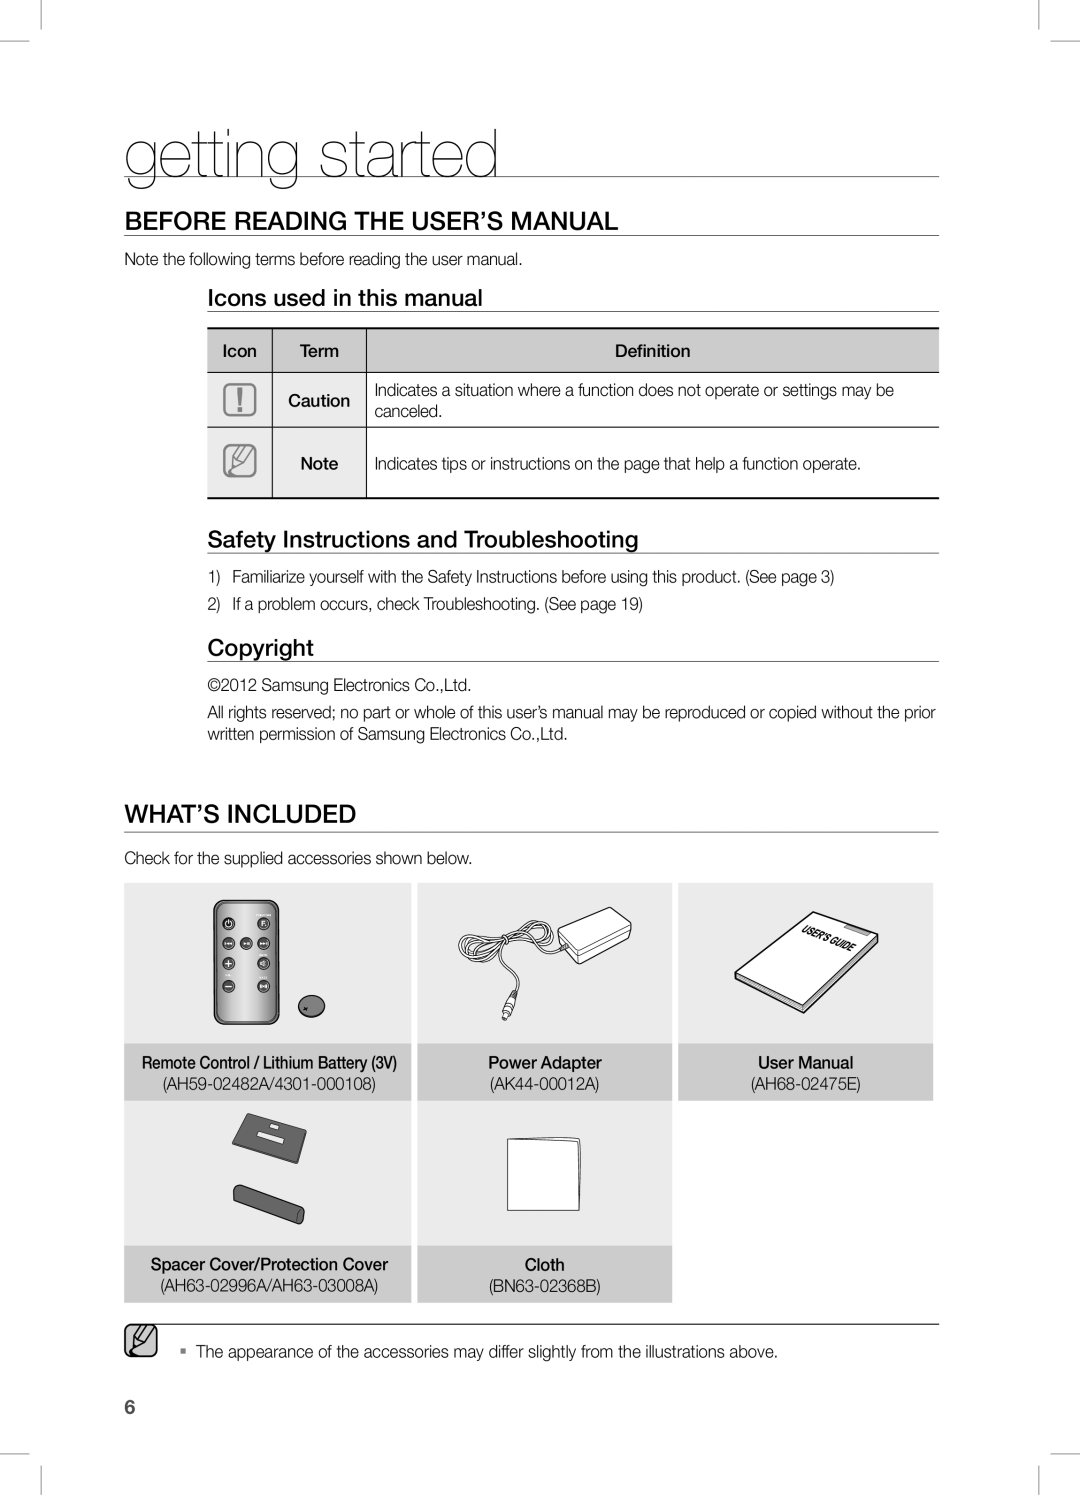 Samsung DA-E570 getting started, WHAT’s inclUDED, Icons used in this manual, Safety Instructions and Troubleshooting 